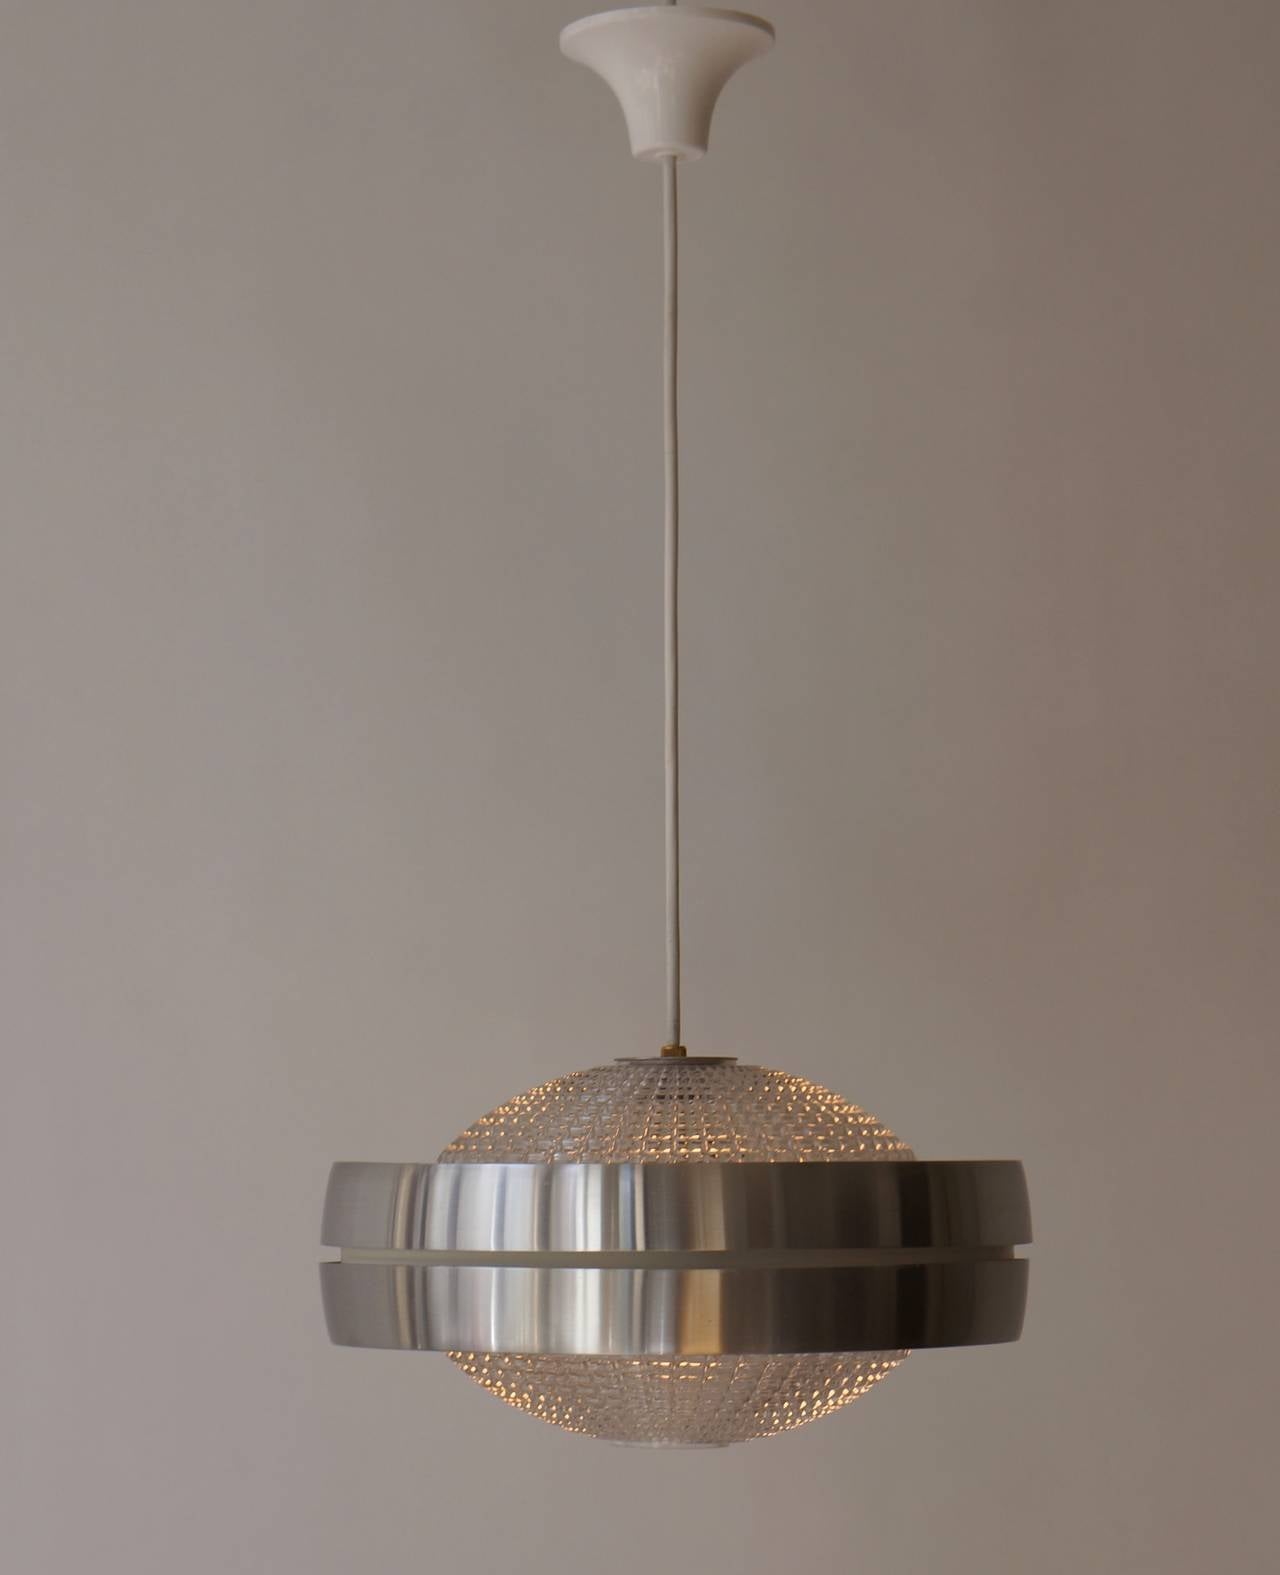 Four Raak Ufo Shaped Pendant Lights in Glass and Aluminum In Good Condition For Sale In Antwerp, BE